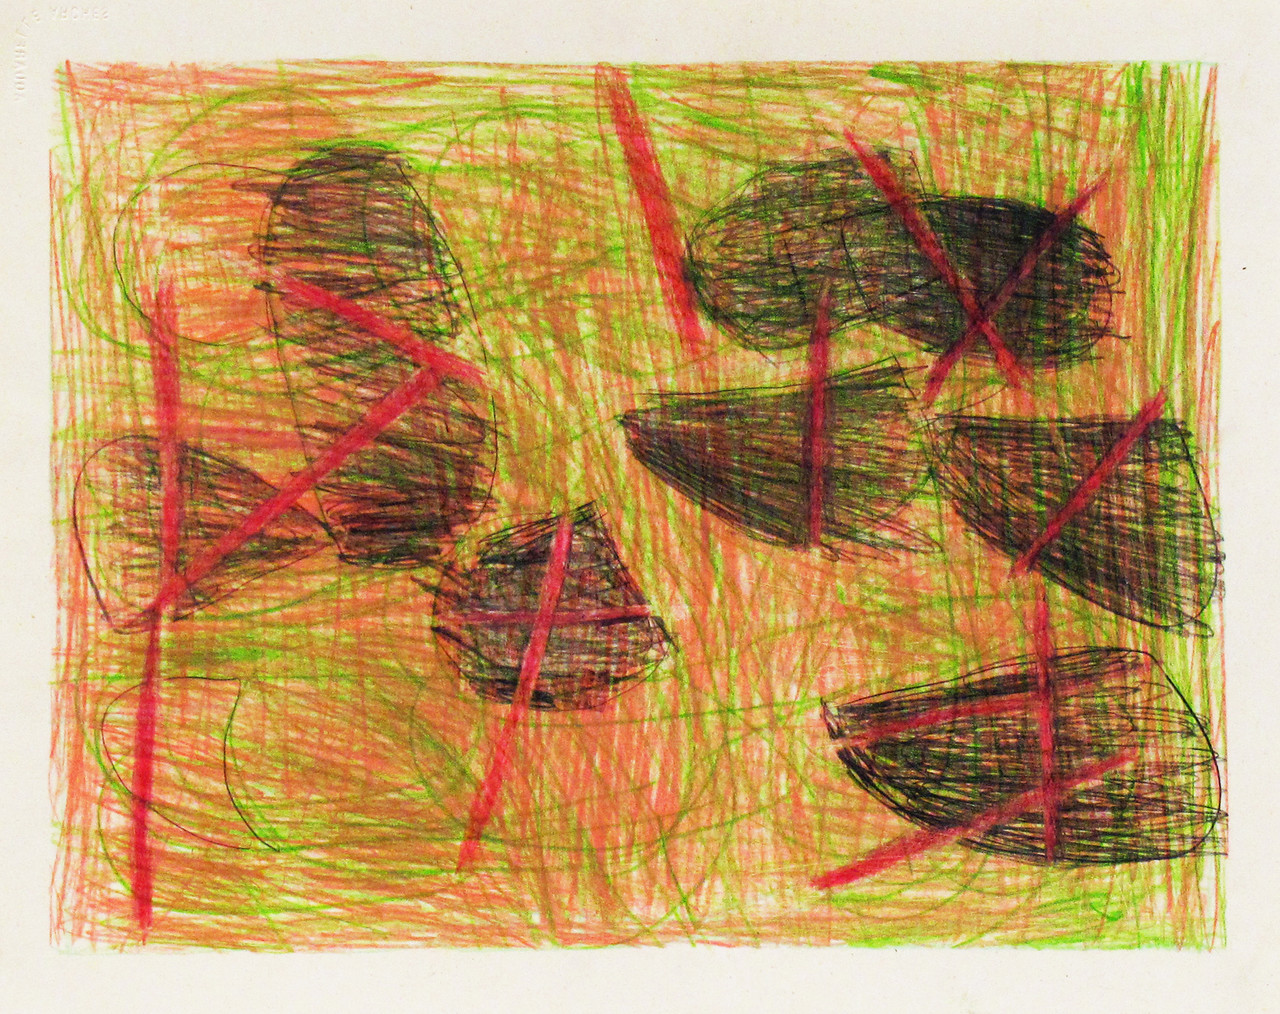 Untitled, 1988, Colored pencil and graphite on paper, 38.7 x 47 cm, BS 018